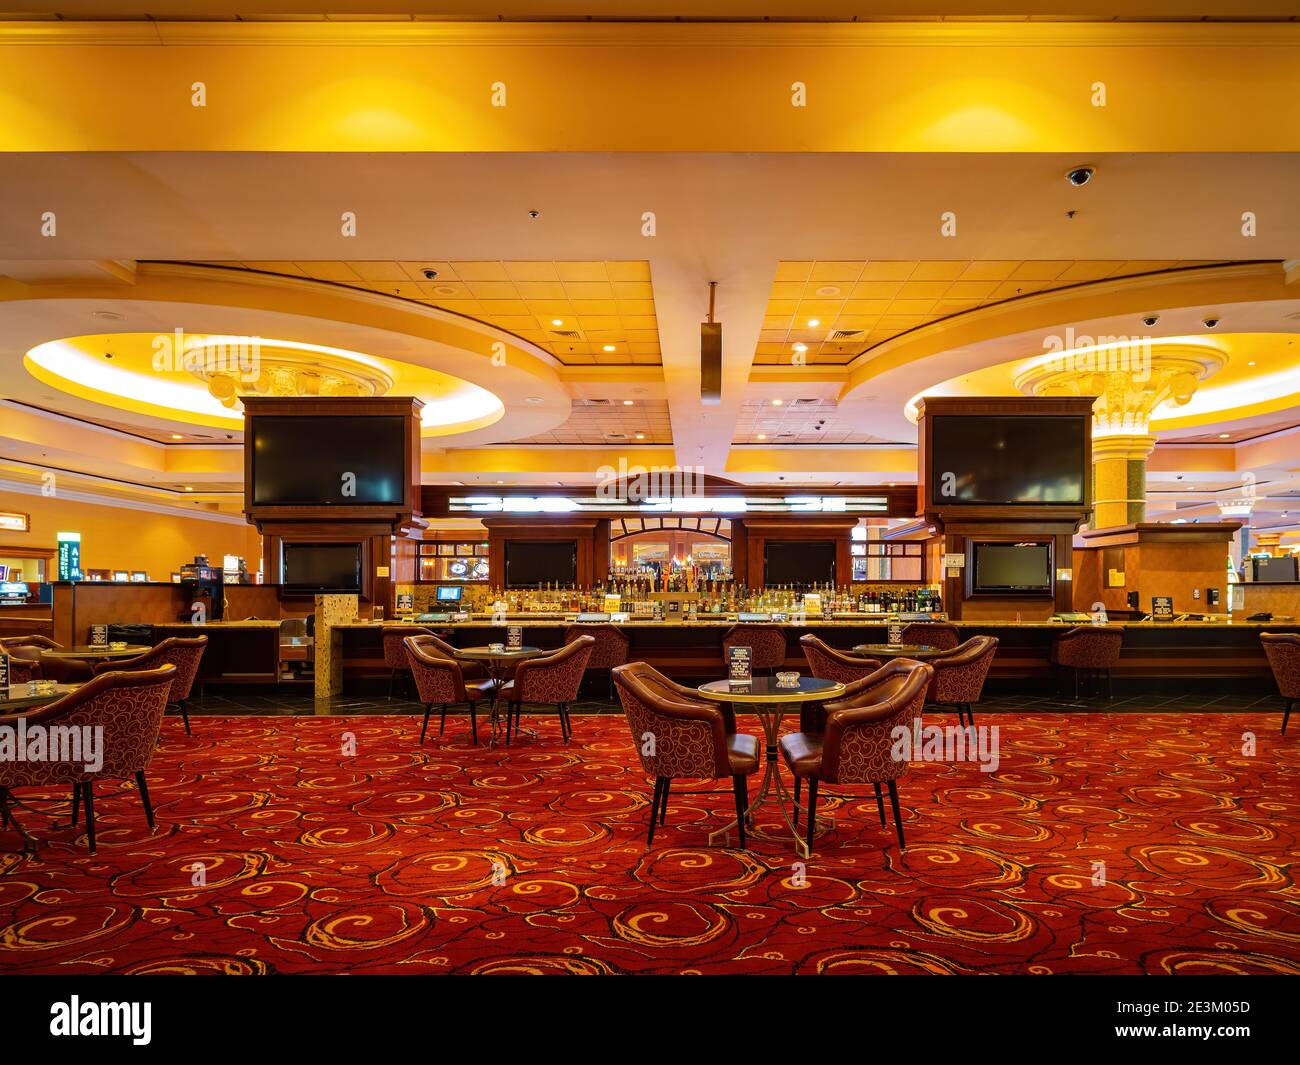 78 South Point Hotel Casino Images, Stock Photos, 3D objects, & Vectors